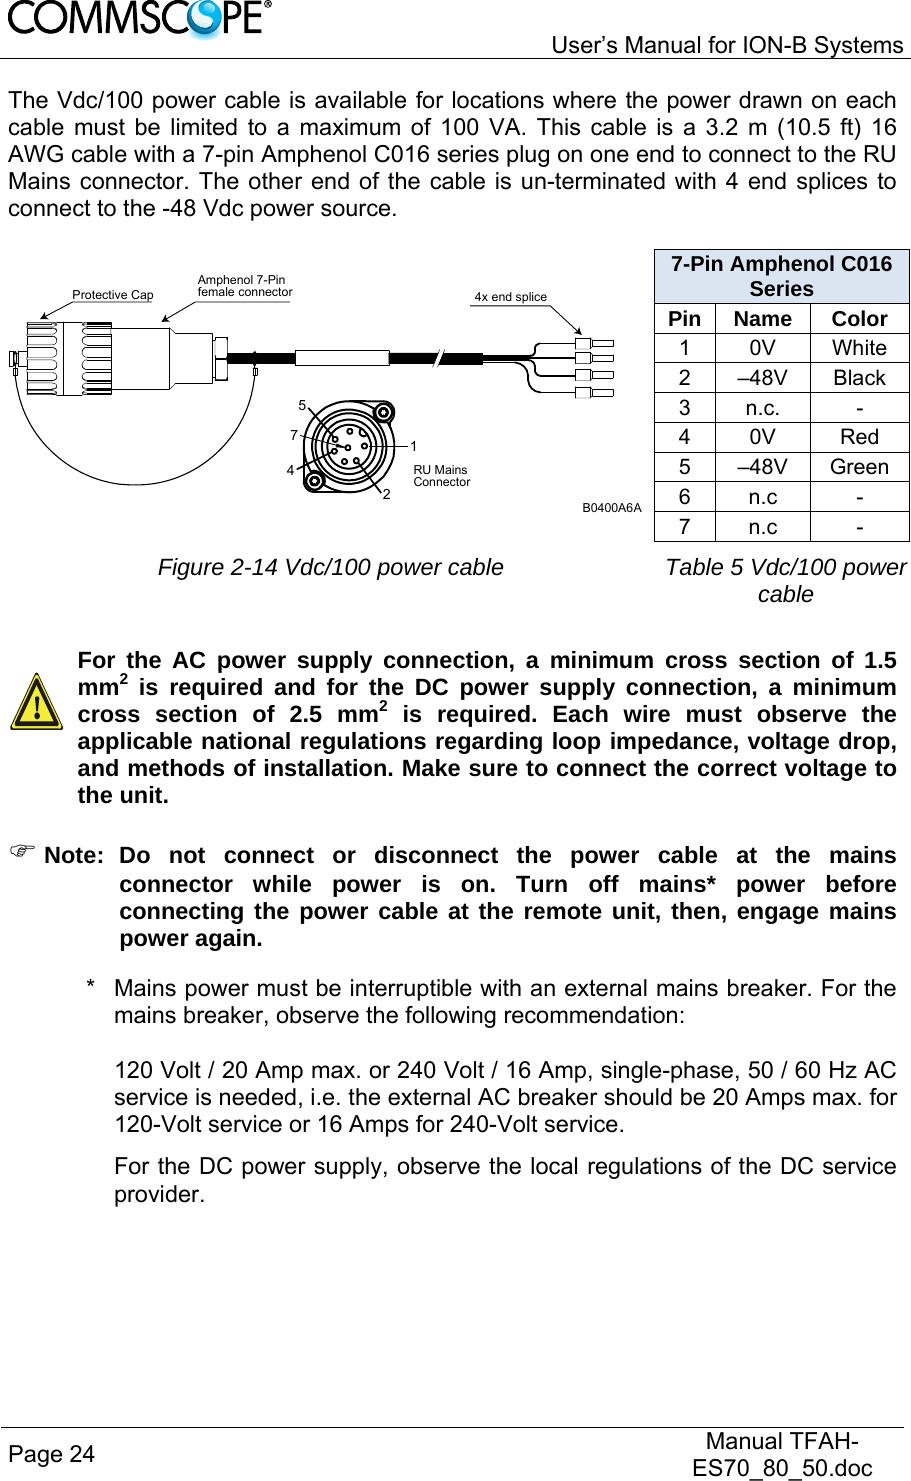   User’s Manual for ION-B Systems Page 24   Manual TFAH-ES70_80_50.doc  The Vdc/100 power cable is available for locations where the power drawn on each cable must be limited to a maximum of 100 VA. This cable is a 3.2 m (10.5 ft) 16 AWG cable with a 7-pin Amphenol C016 series plug on one end to connect to the RU Mains connector. The other end of the cable is un-terminated with 4 end splices to connect to the -48 Vdc power source.   12457Amphenol 7-Pinfemale connectorProtective Cap 4x end spliceB0400A6ARU MainsConnector7-Pin Amphenol C016 Series Pin Name  Color 1 0V White 2 –48V Black 3 n.c.  - 4 0V  Red 5 –48V Green 6 n.c  - 7 n.c  -  Figure 2-14 Vdc/100 power cable Table 5 Vdc/100 power cable    For the AC power supply connection, a minimum cross section of 1.5 mm2 is required and for the DC power supply connection, a minimum cross section of 2.5 mm2 is required. Each wire must observe the applicable national regulations regarding loop impedance, voltage drop, and methods of installation. Make sure to connect the correct voltage to the unit.   Note:  Do not connect or disconnect the power cable at the mains connector while power is on. Turn off mains* power before connecting the power cable at the remote unit, then, engage mains power again. *   Mains power must be interruptible with an external mains breaker. For the mains breaker, observe the following recommendation:  120 Volt / 20 Amp max. or 240 Volt / 16 Amp, single-phase, 50 / 60 Hz AC service is needed, i.e. the external AC breaker should be 20 Amps max. for 120-Volt service or 16 Amps for 240-Volt service. For the DC power supply, observe the local regulations of the DC service provider. 